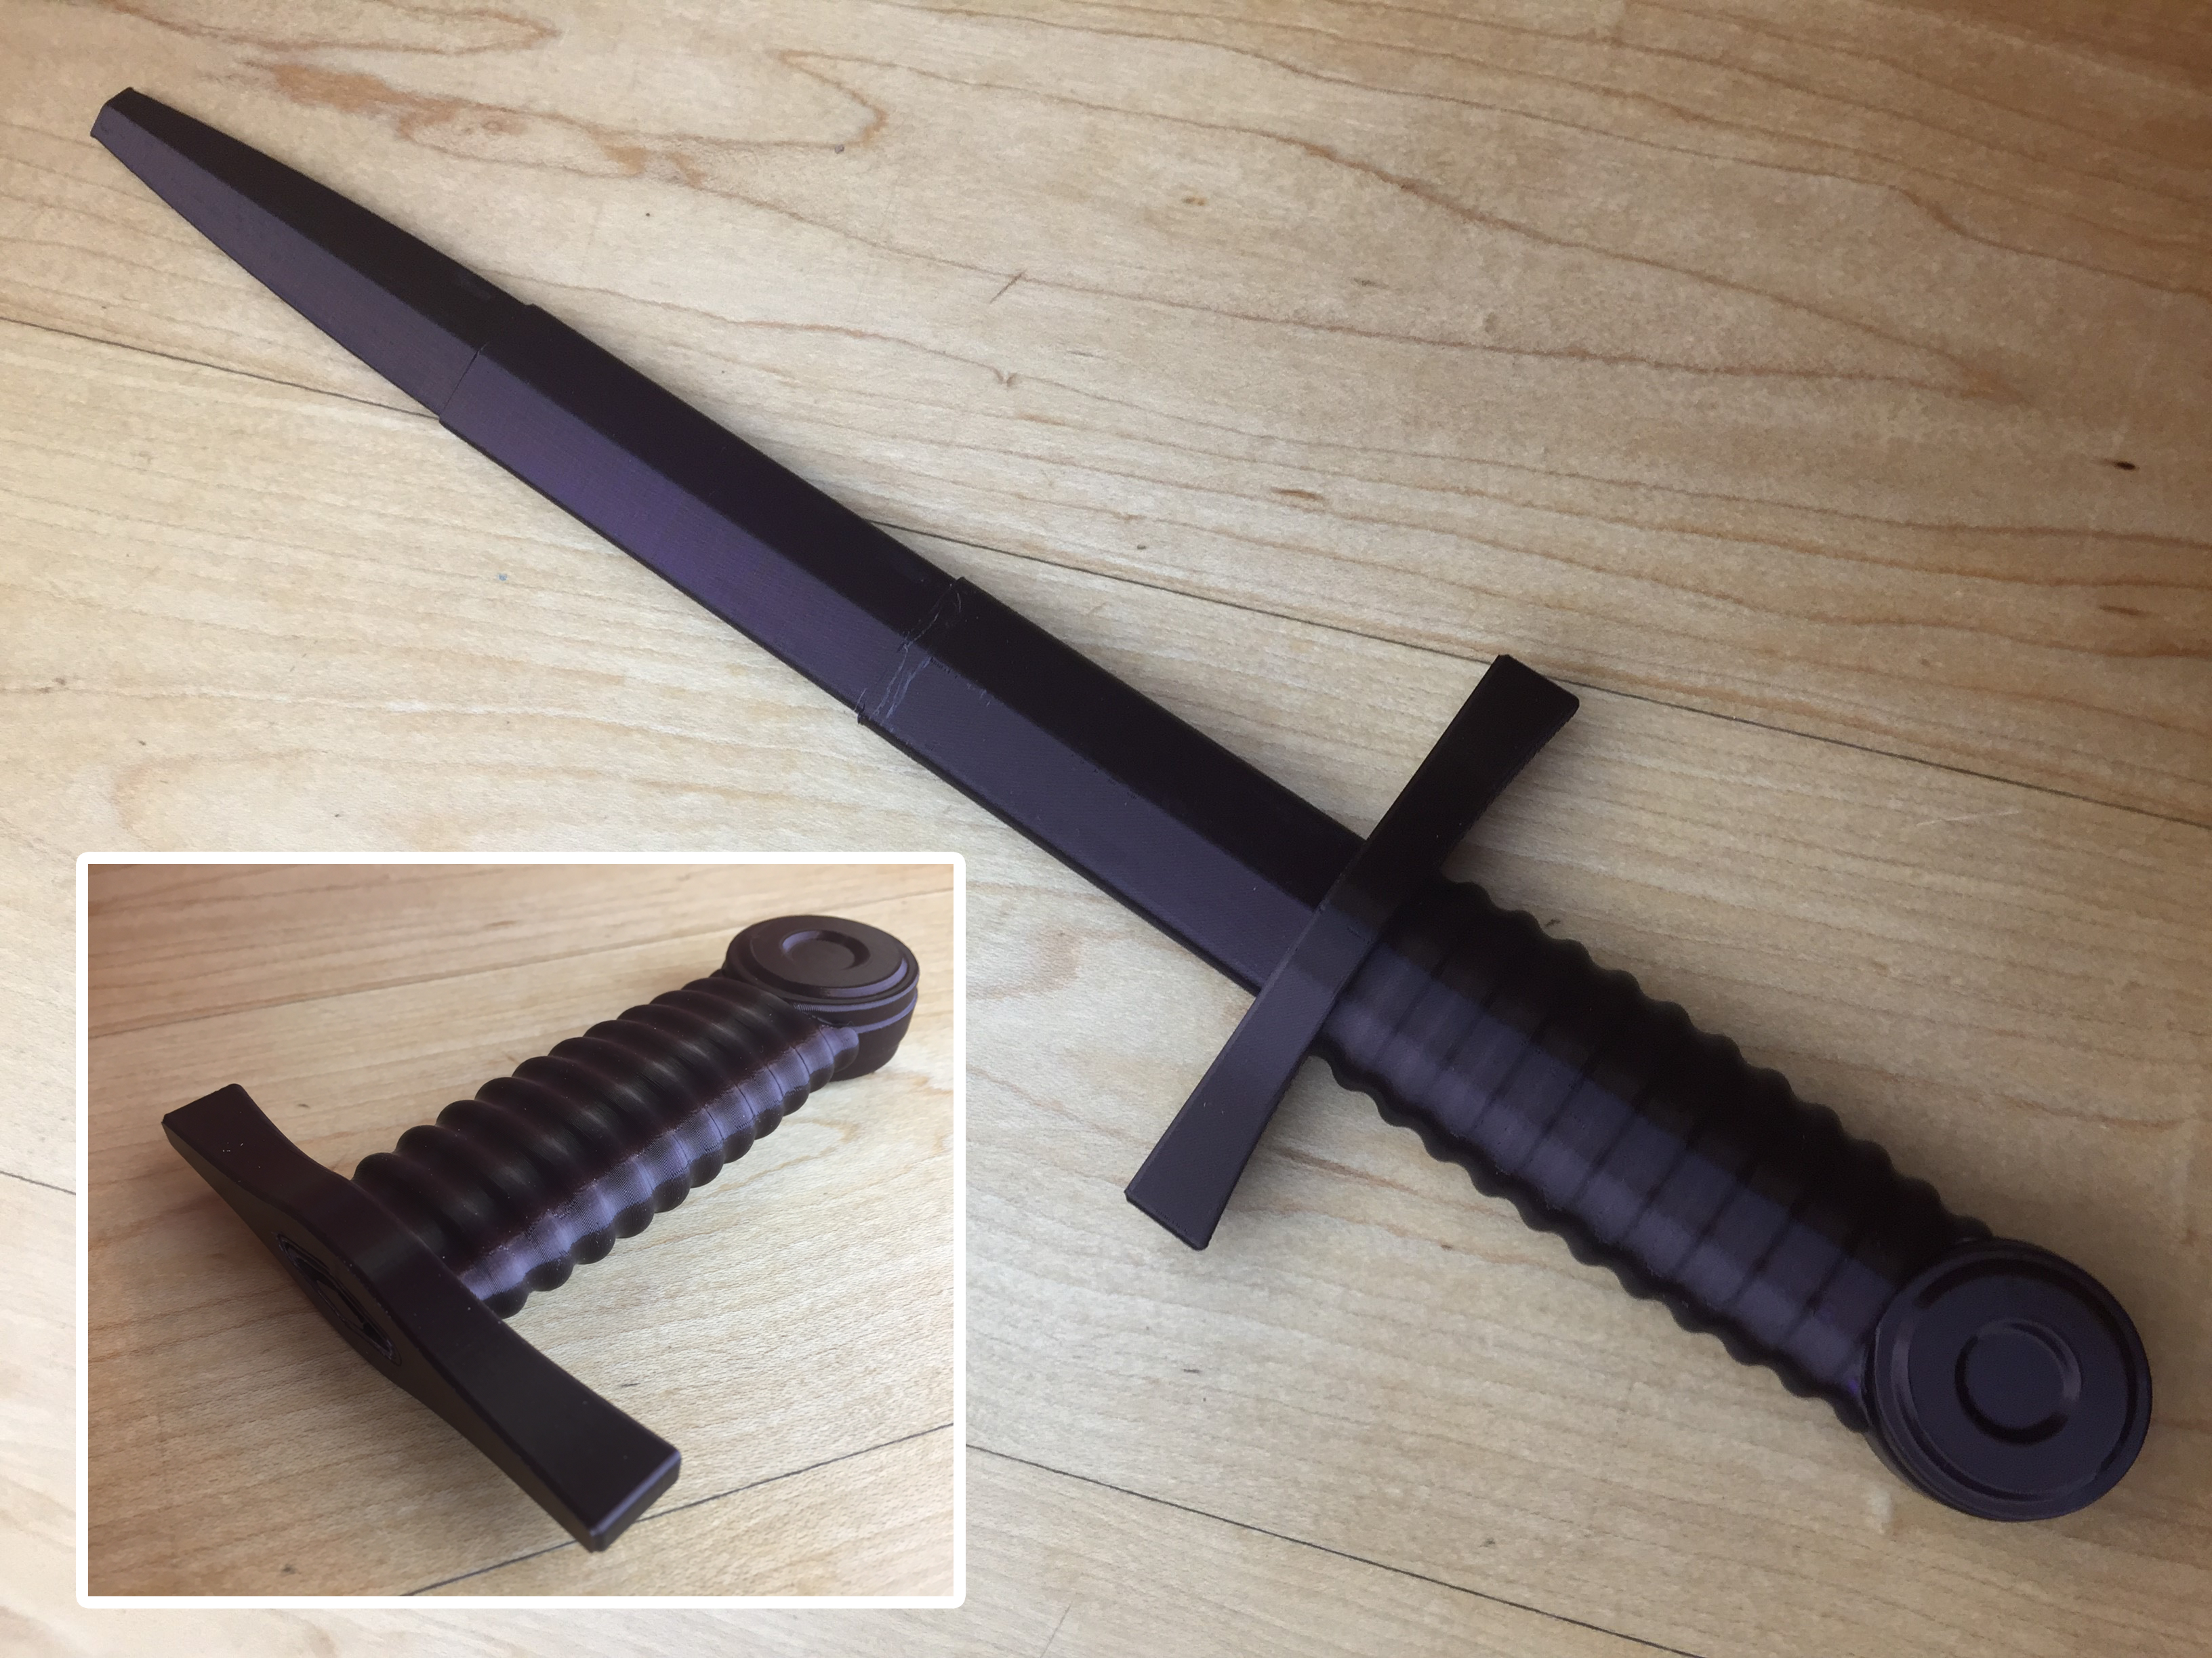 Collapsing Pirate Sword - 3D model by 3dprintingworld on Thangs